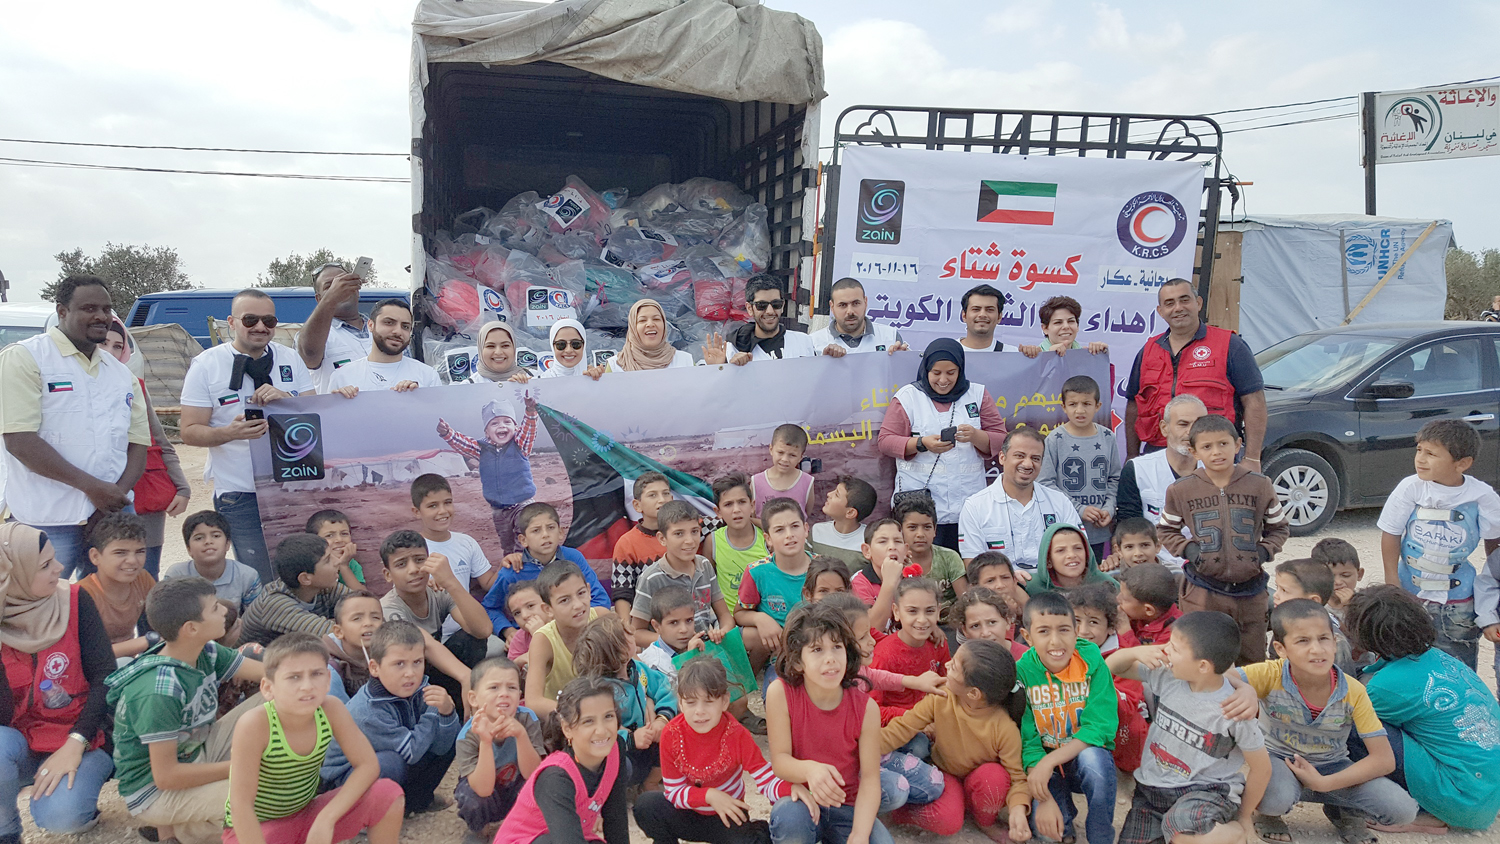 (KRSC) and Zain telecom provid's relief aid to Syrian refugee families in Akkar in northern Lebanon